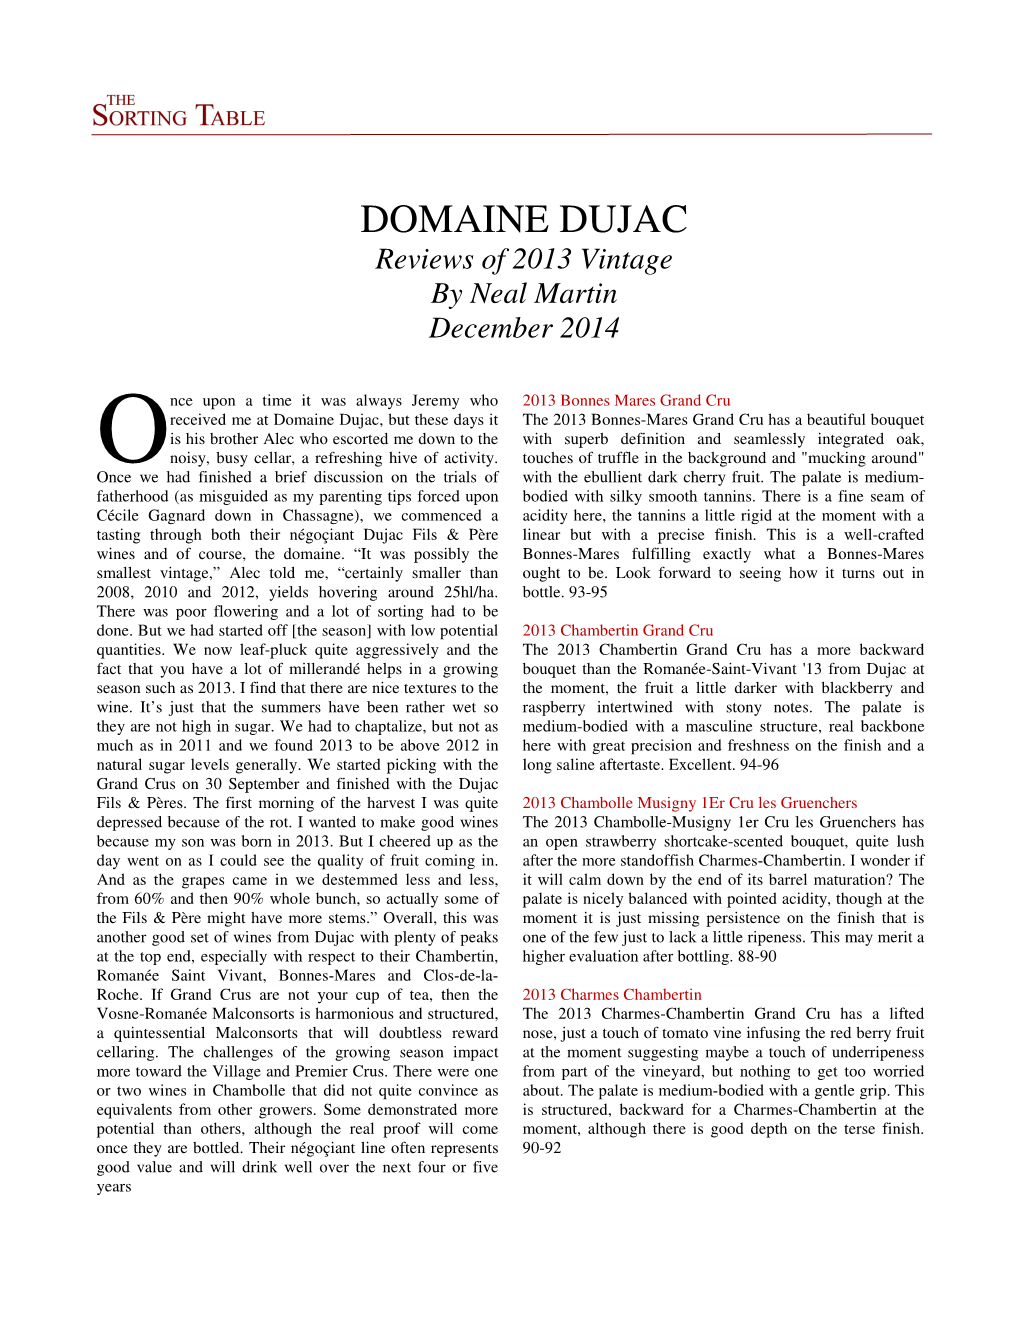 DOMAINE DUJAC Reviews of 2013 Vintage by Neal Martin December 2014